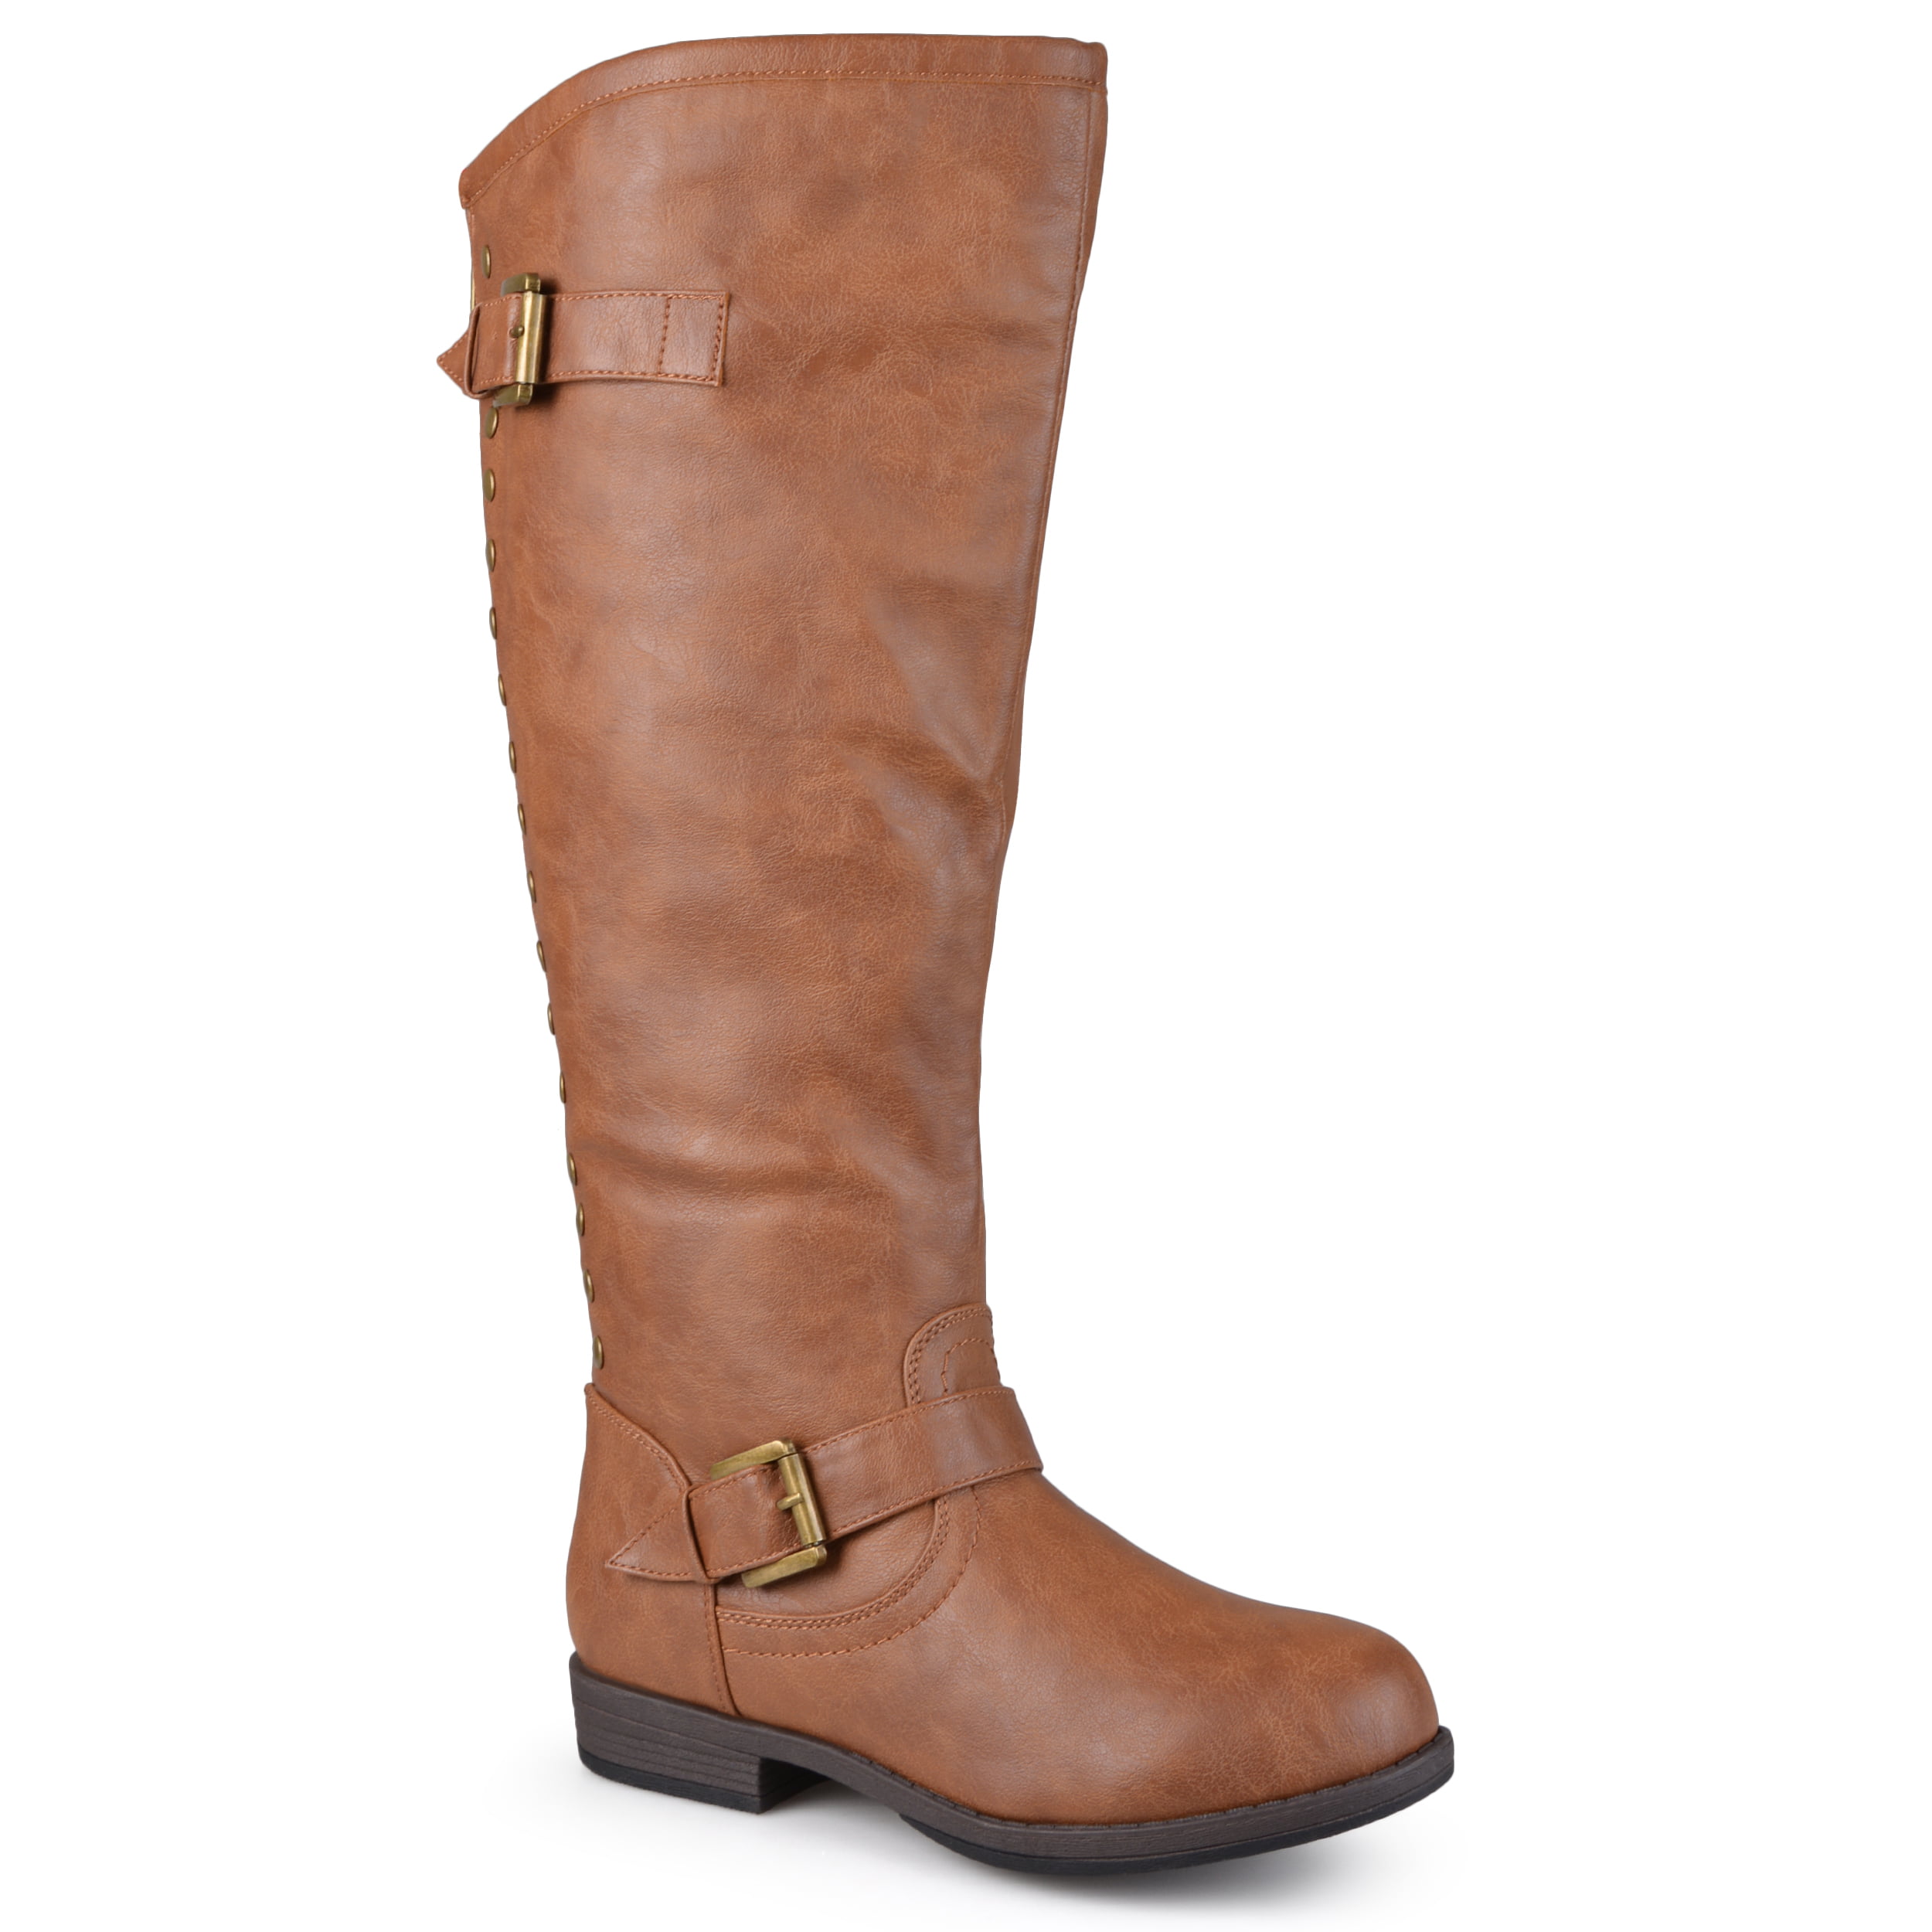 Buy > extra wide calf leather riding boots > in stock